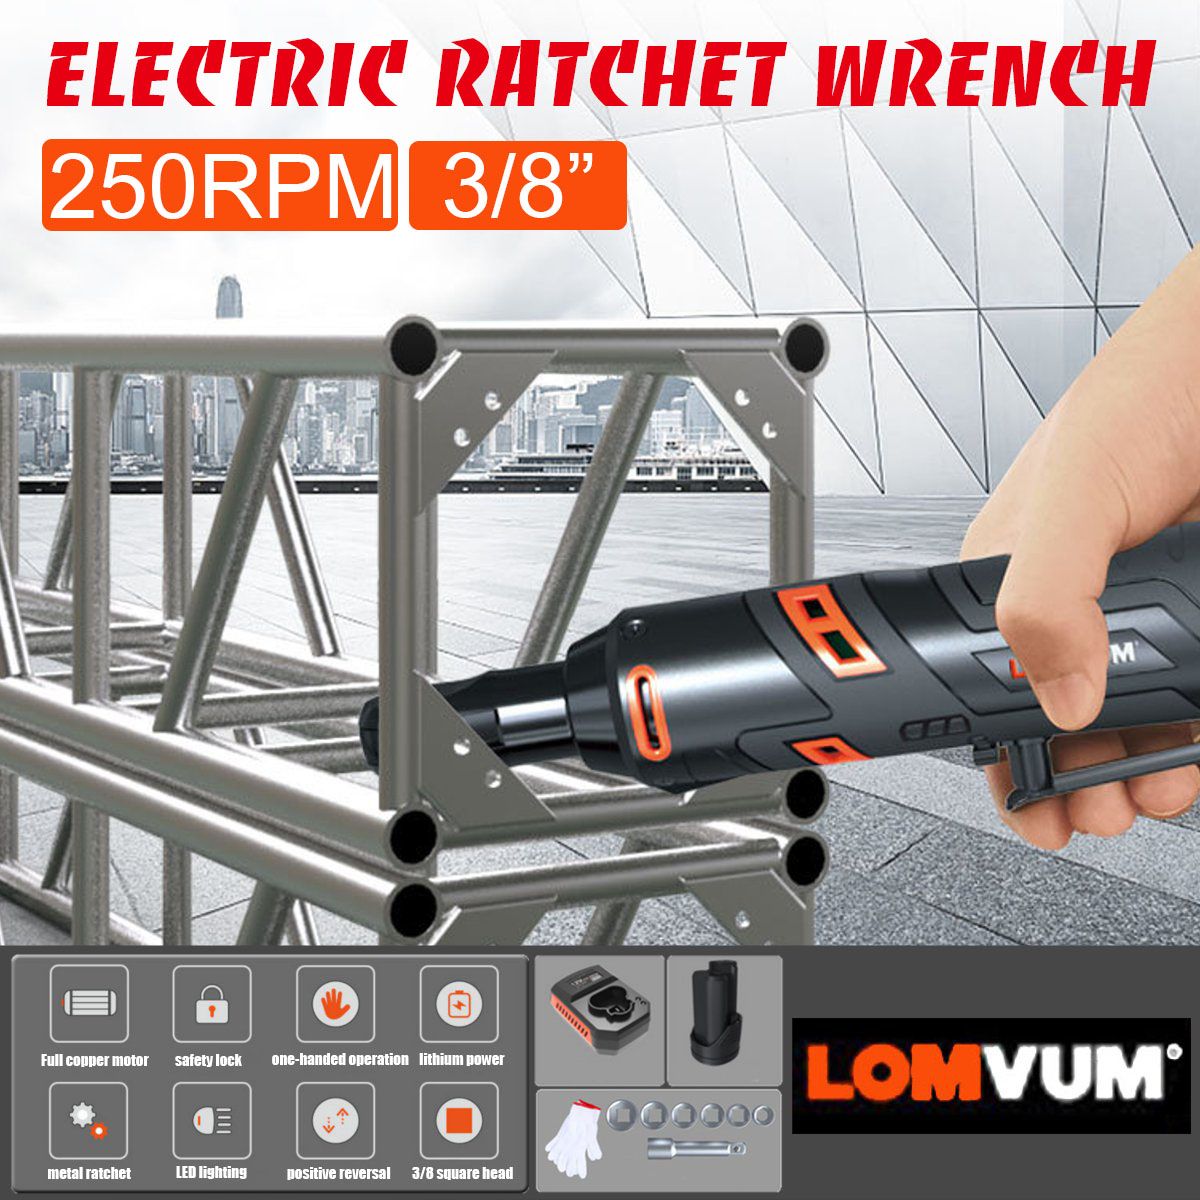 Power-Cordless-Ratchet-Wrench-Toolkit-38Inch-60NM-12V-Electric-Ratchet-Wrench-Right-Angle-With-Batte-1529794